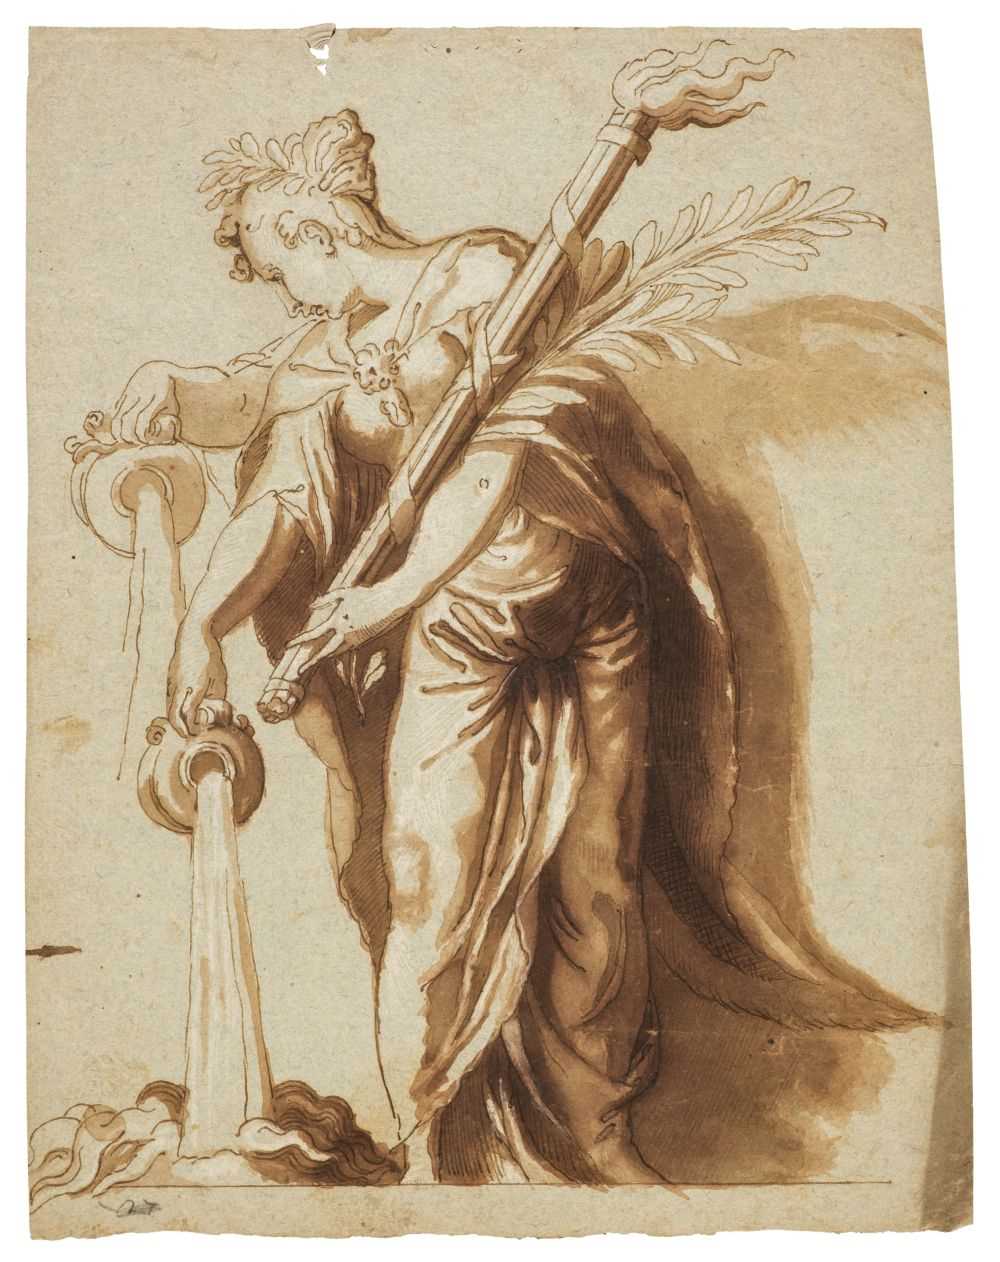 Lot 316 - Farinati (Paolo, 1524-1606). Female deity holding a fire torch and pouring water from a jug